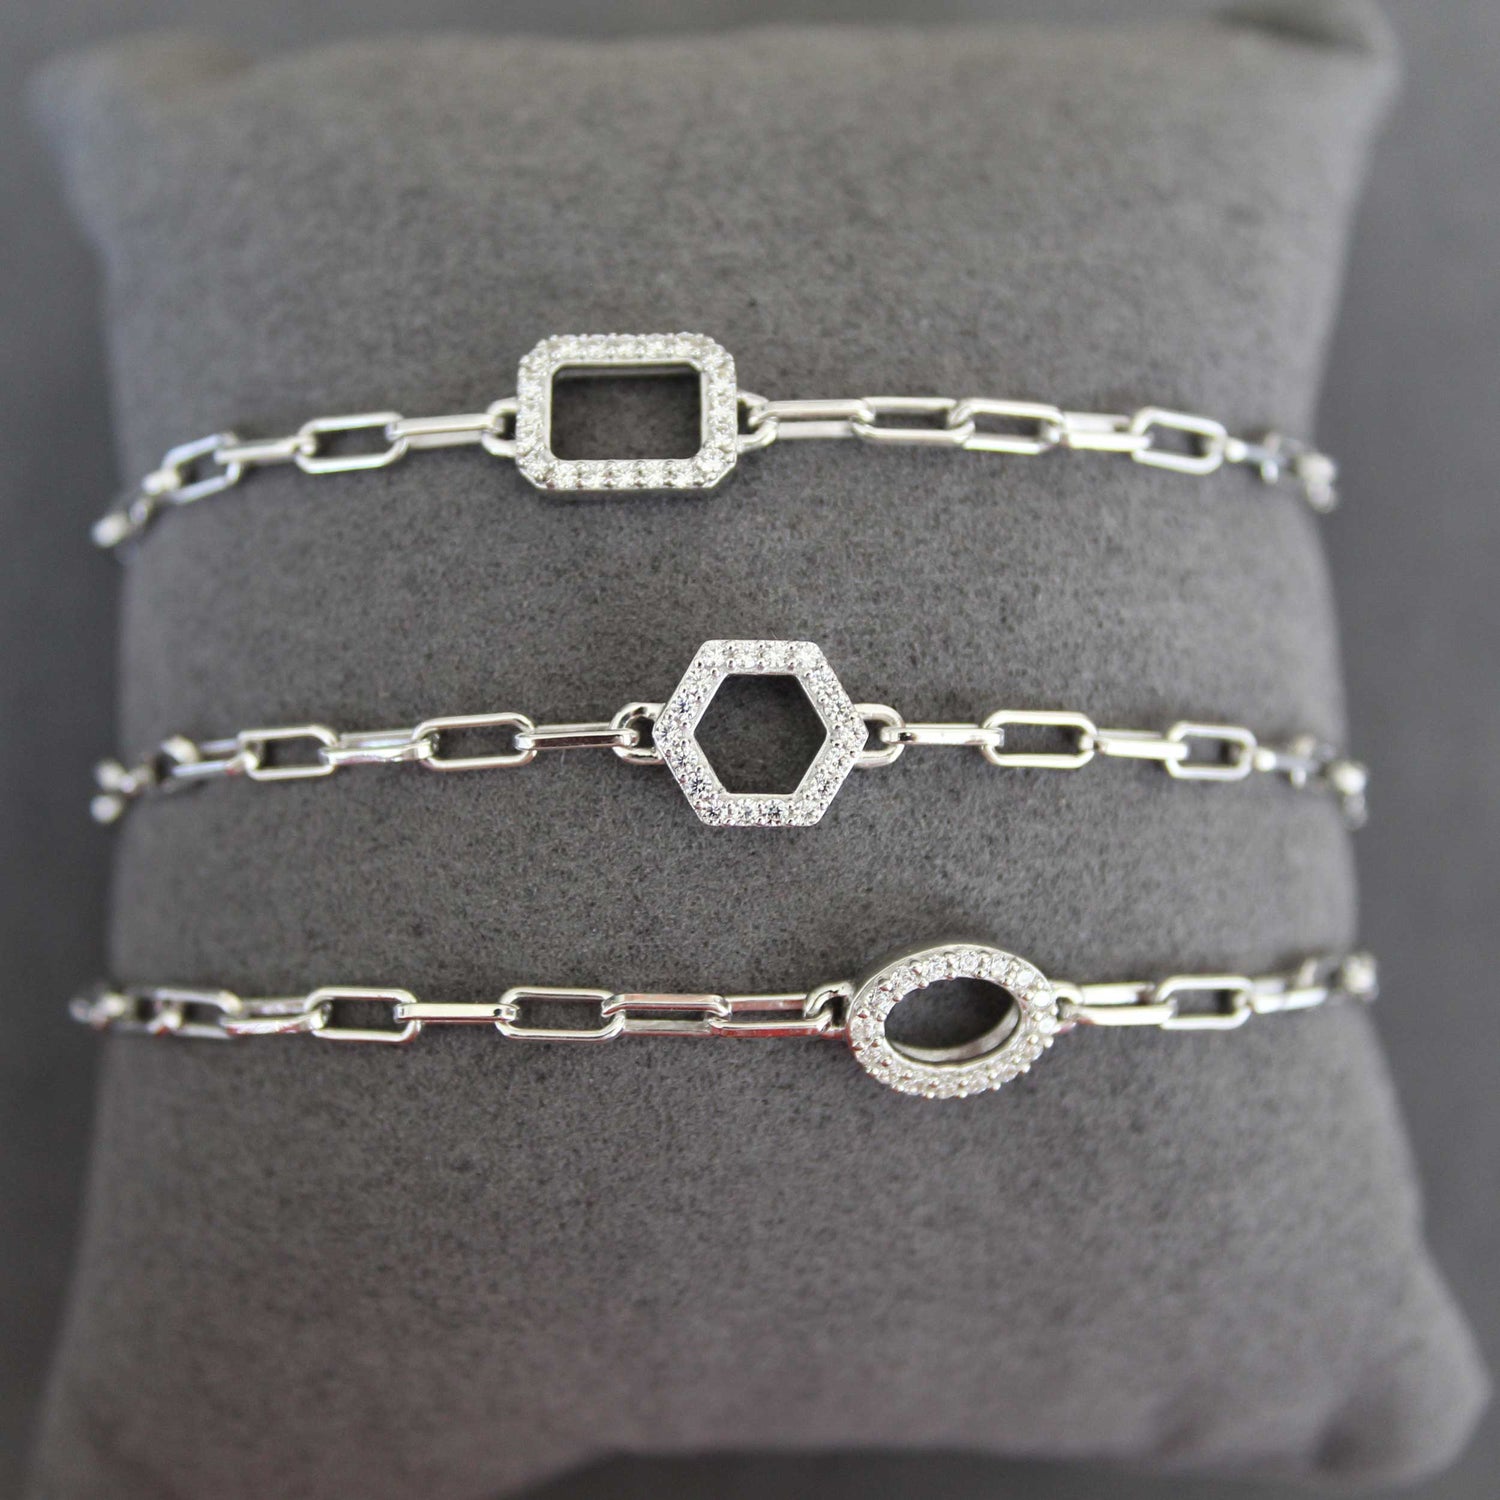 SALE 1/6 Cttw Natural Diamond Pave Hexagon Link Chain 7" Bracelet in 925 Sterling Silver